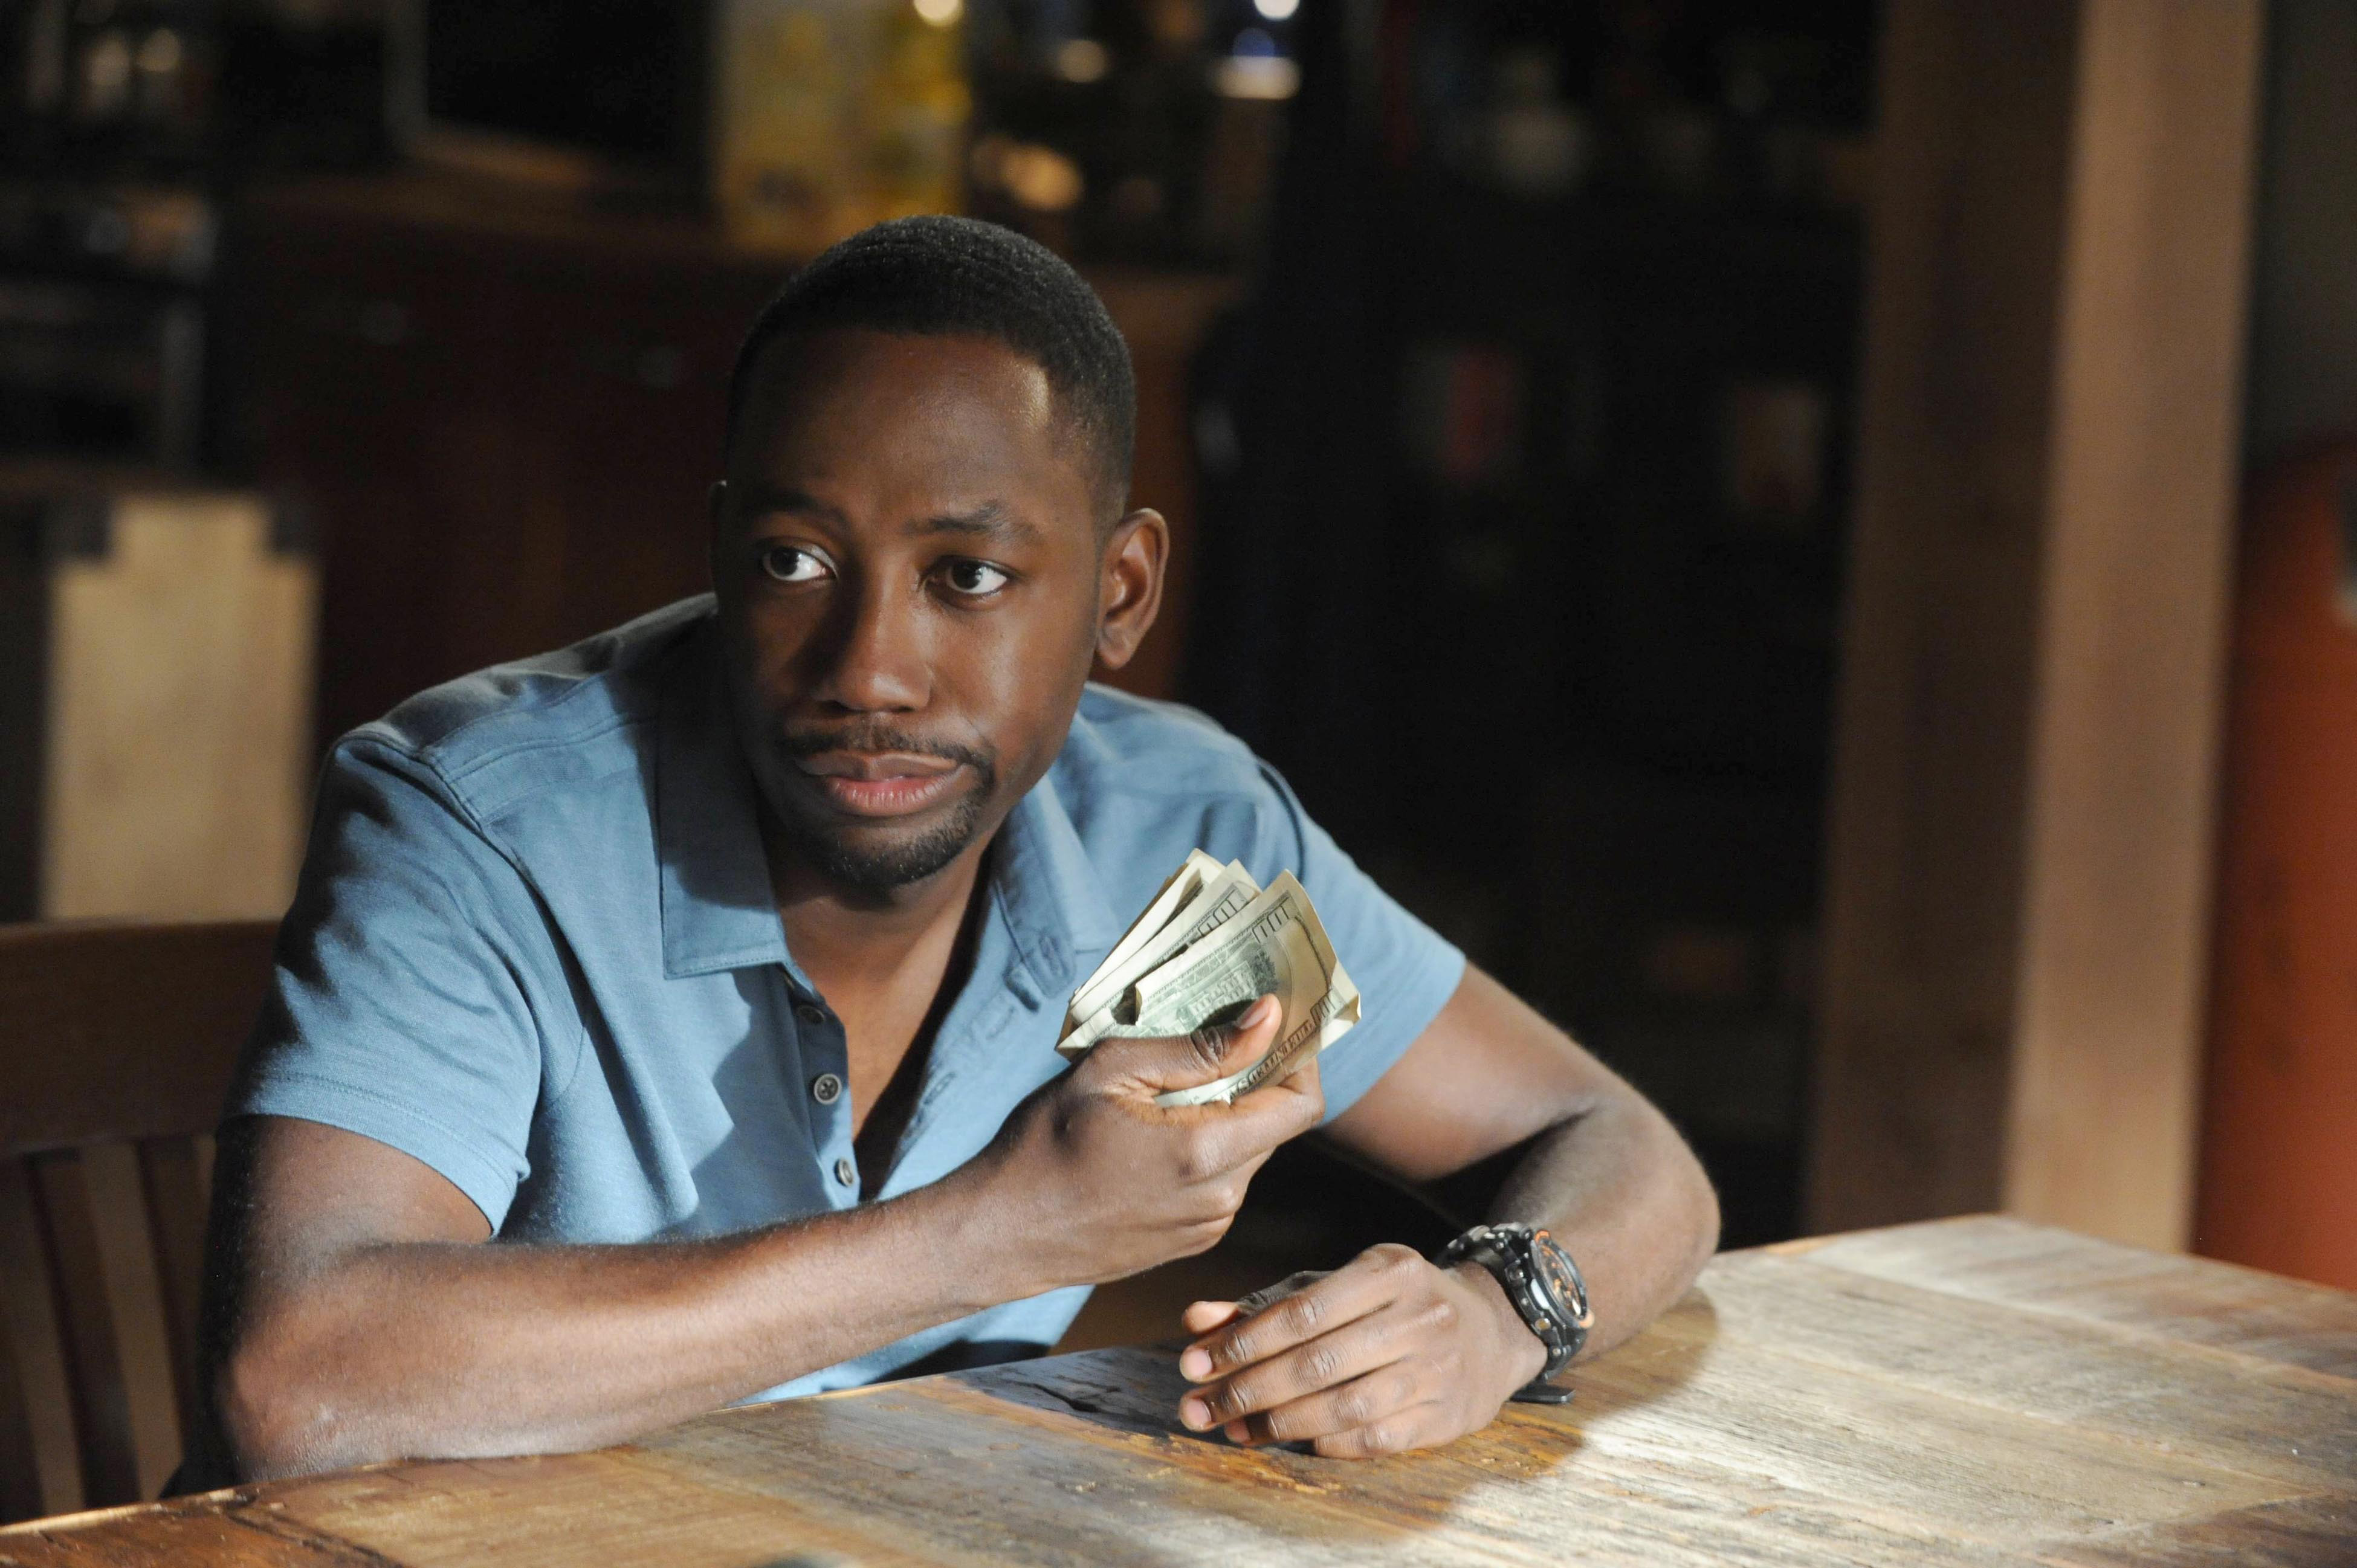 Man at table with contemplative expression holding money, in a scene likely from a TV show or movie